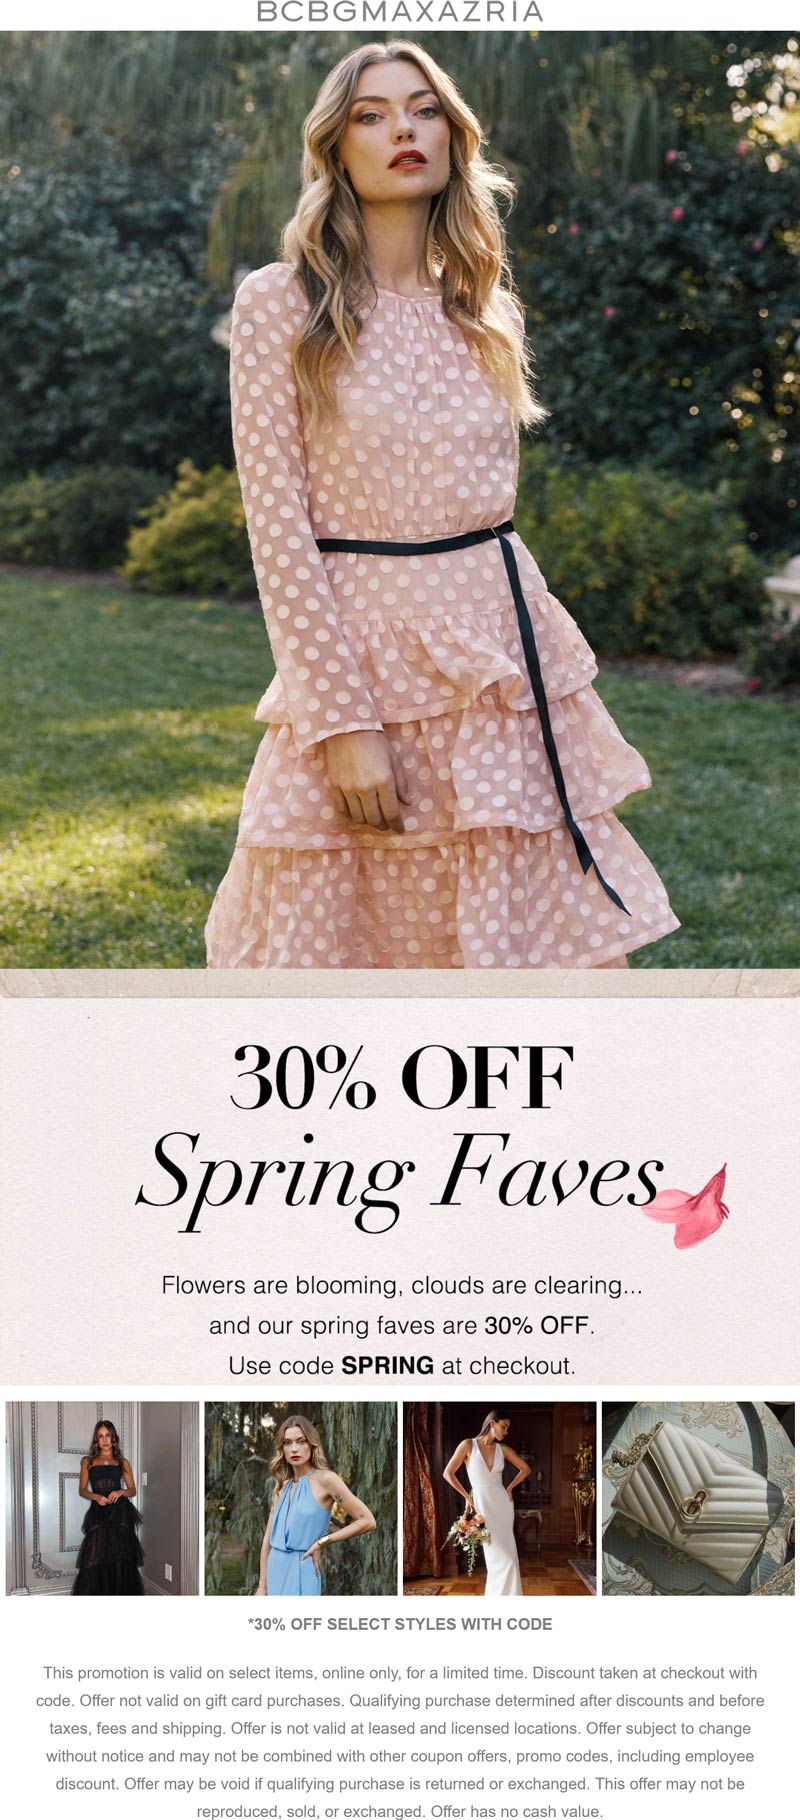 BCBGMAXAZRIA stores Coupon  30% off spring faves at BCBGMAXAZRIA via promo code SPRING #bcbgmaxazria 